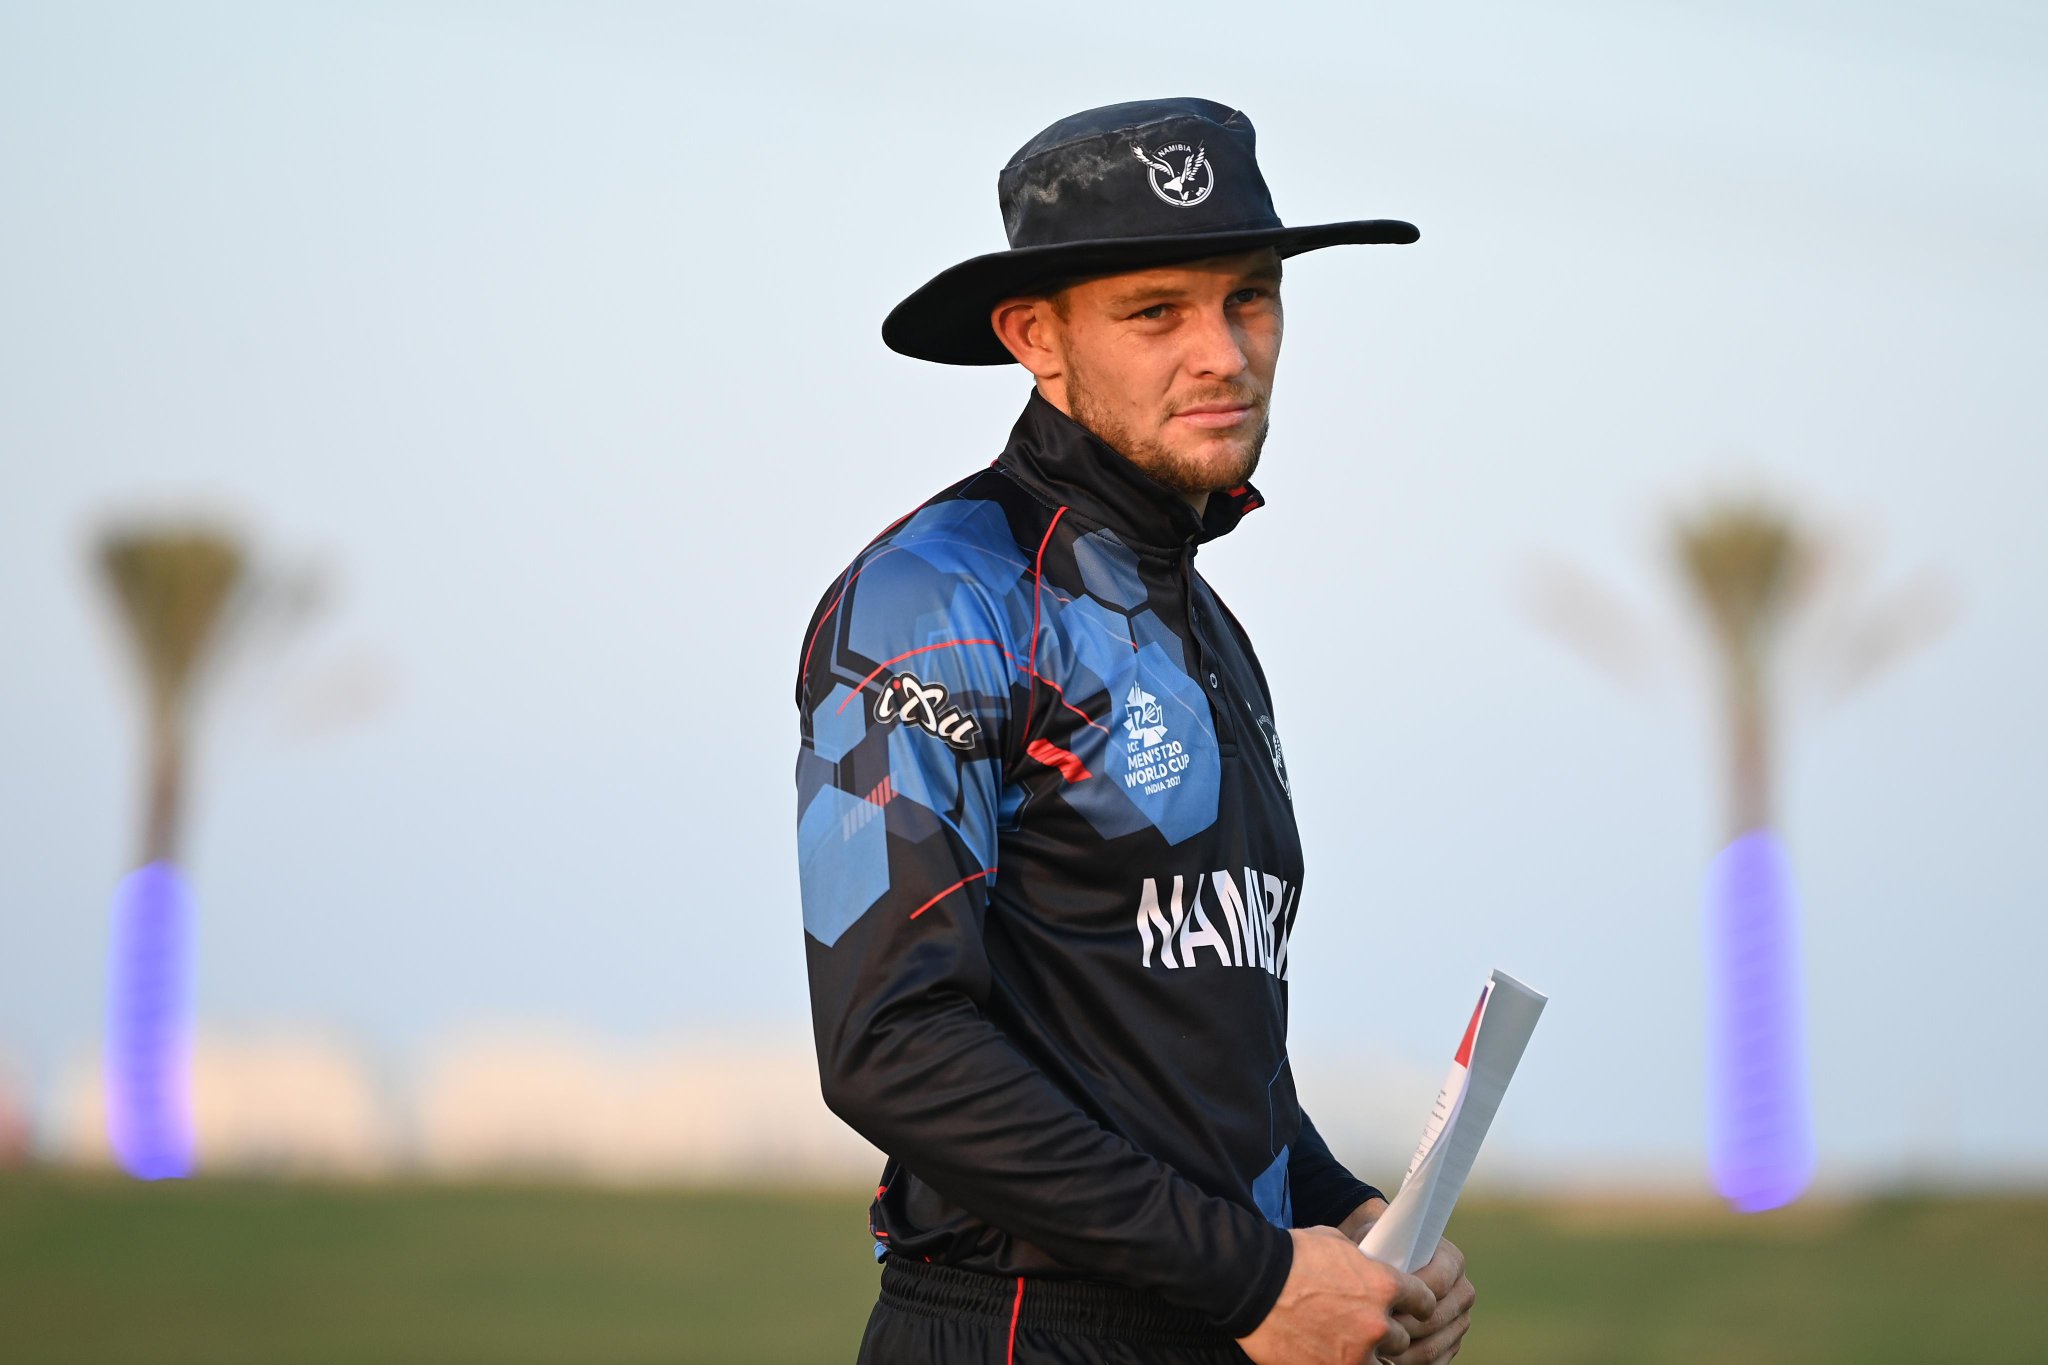 T20 World Cup 2021 | We’ll take Afghanistan defeat as a stepping stone for future, says Namibia captain Gerhard Erasmus